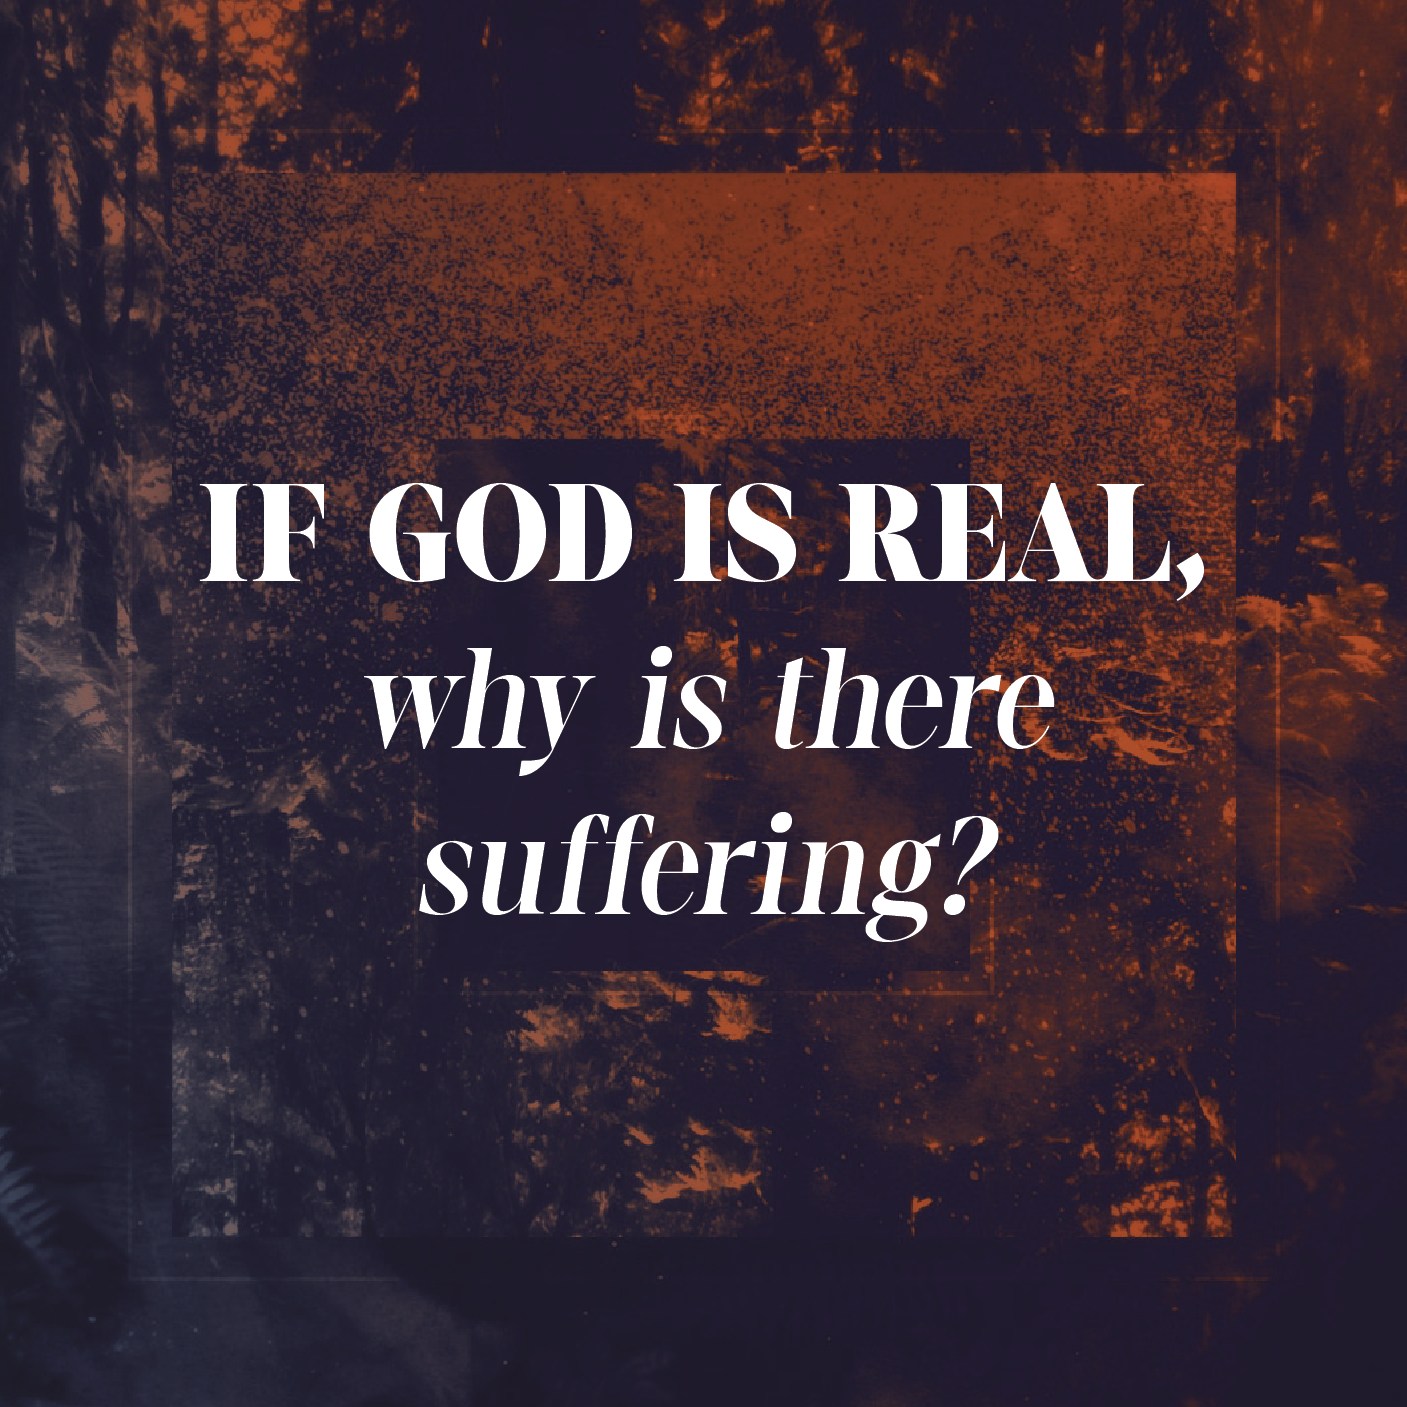 If God is real, why is there suffering?